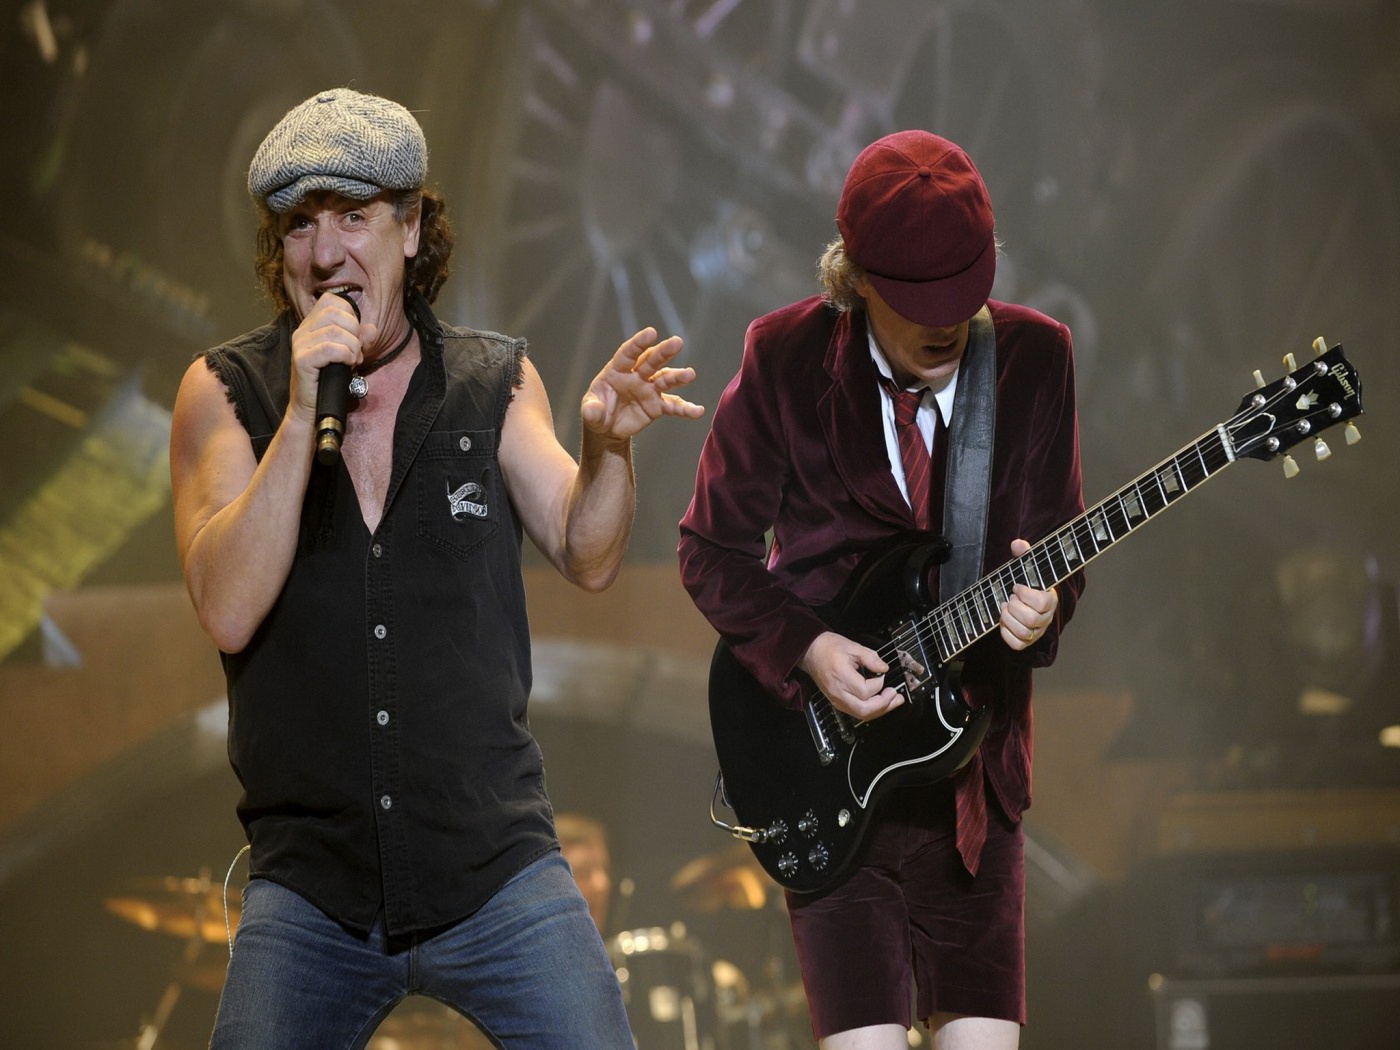 Hope You Like This Angus Young HD Wallpaper As Much We Do